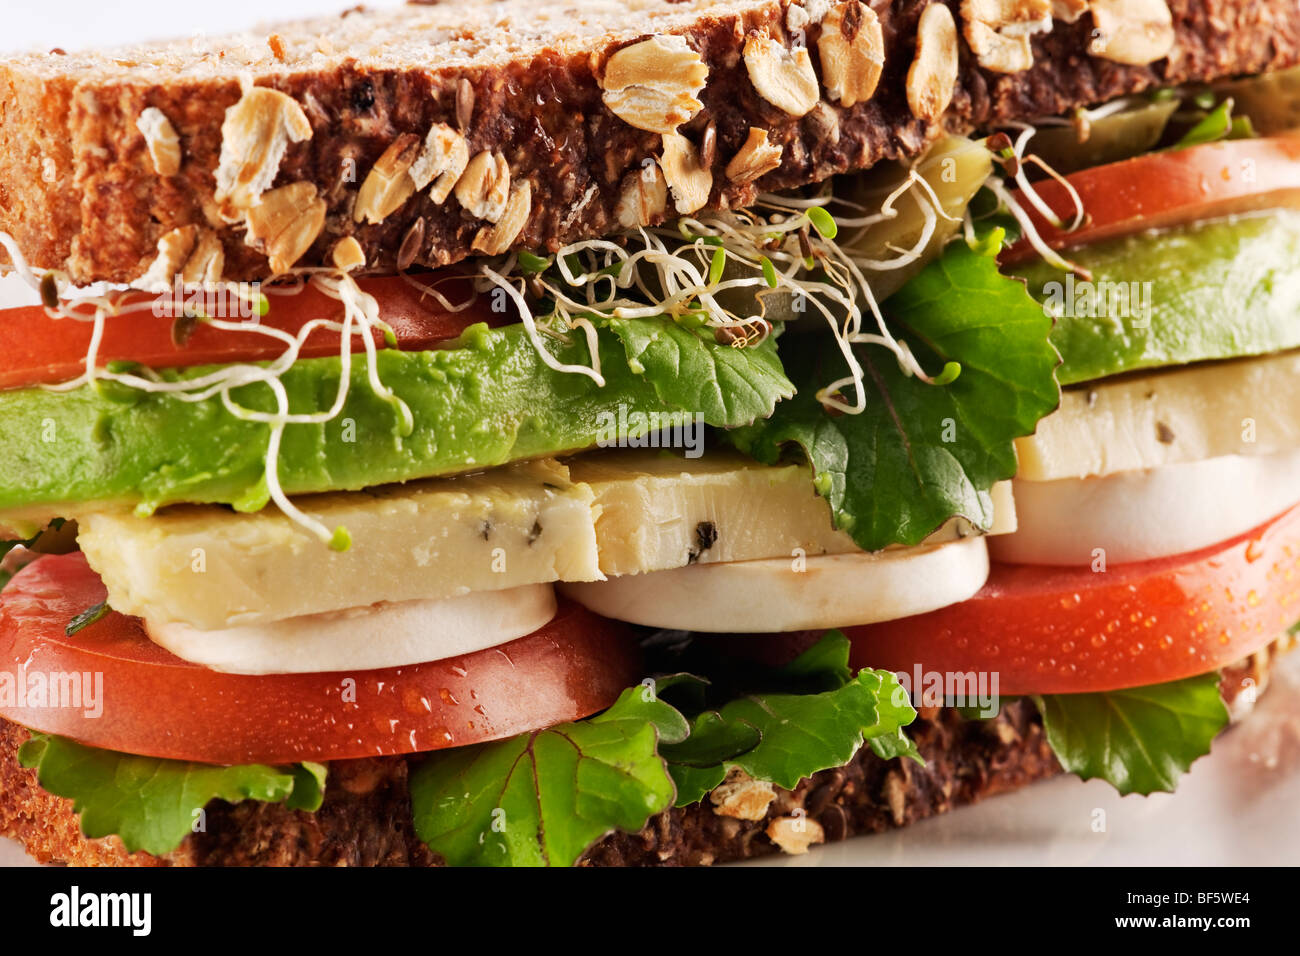 Vegetarian health bread sandwich with avocado, cheese, mushrooms, lettuce, sprouts and tomatoes Stock Photo